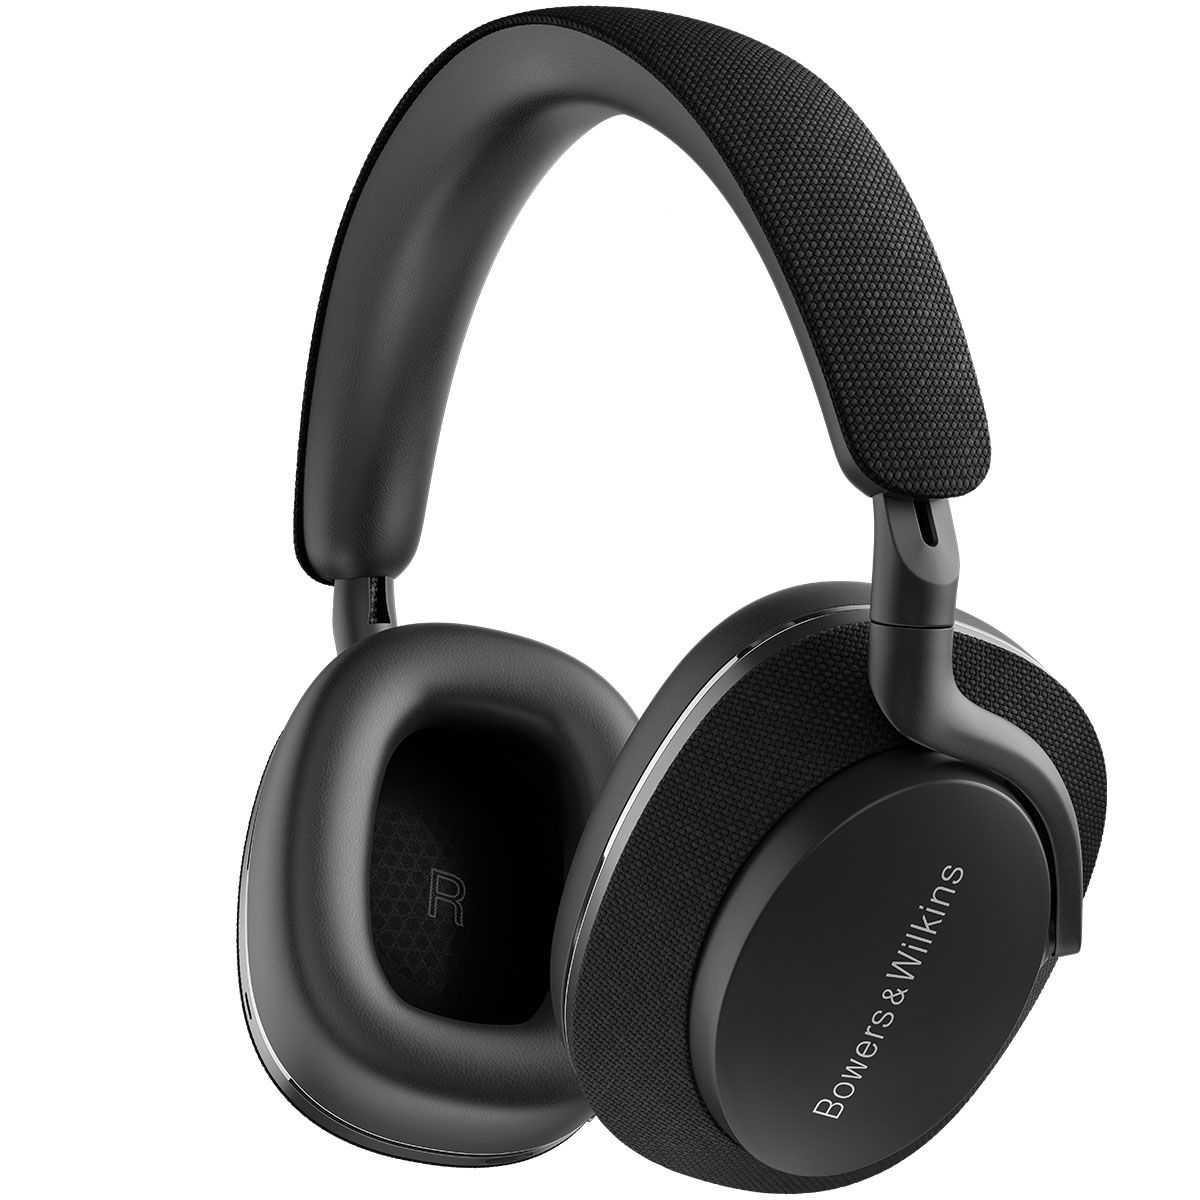 Side view of the Px7 S2 Premium Wireless Over-Ear Headphones in Black.